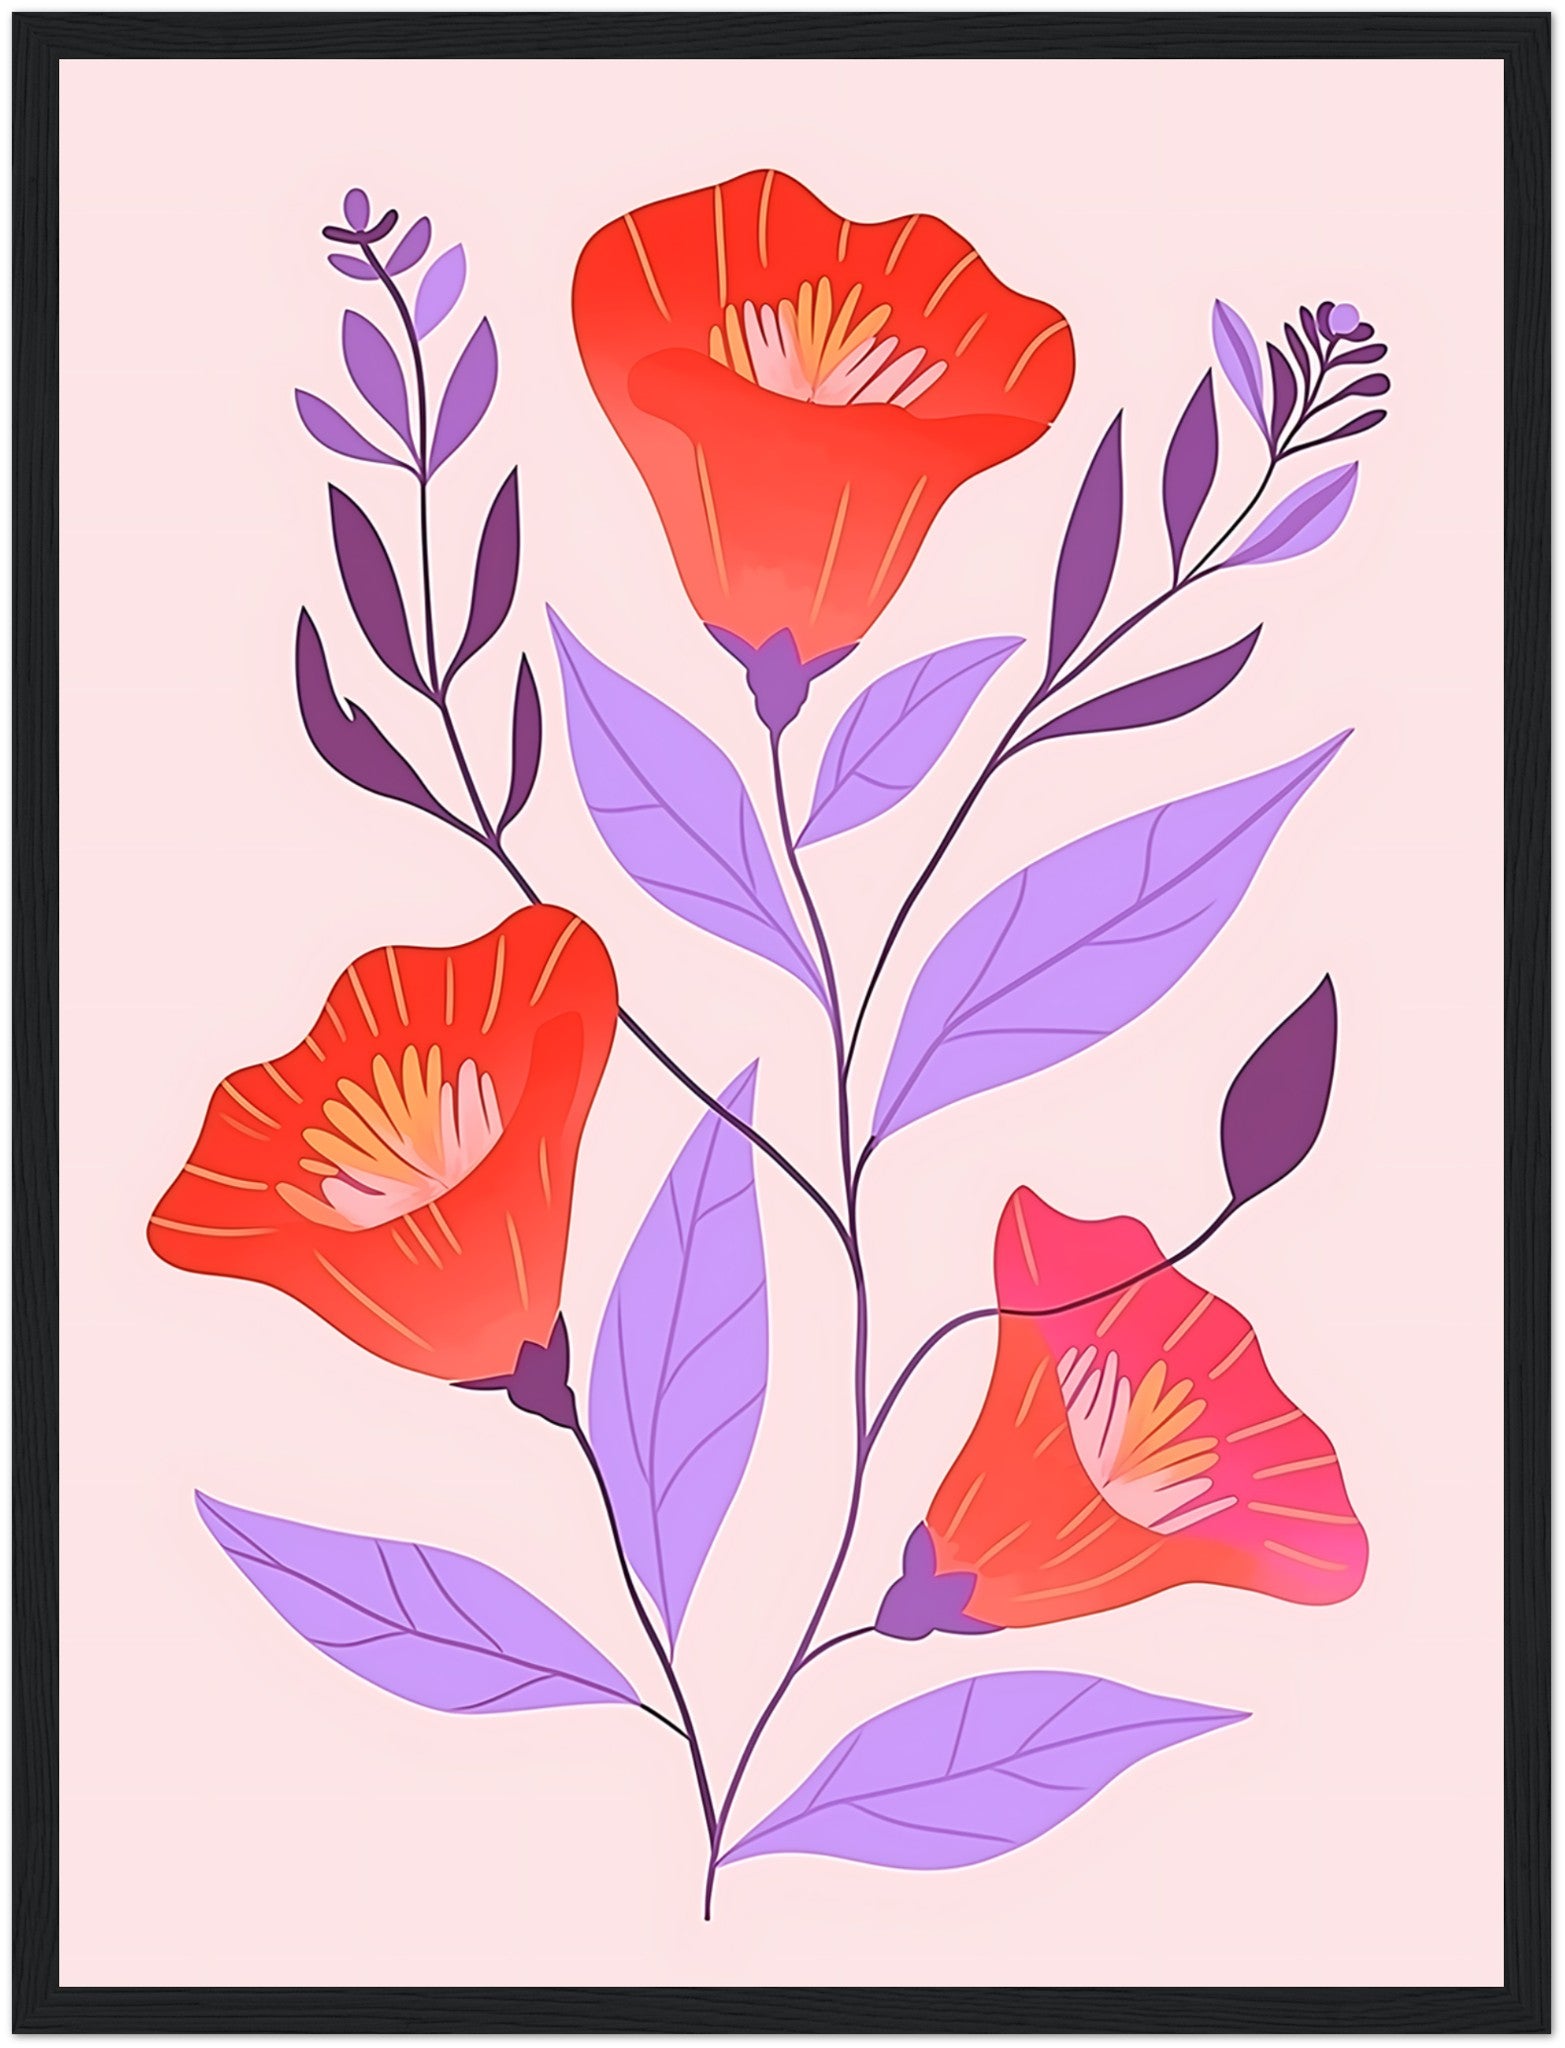 Illustration of red flowers with purple leaves in a brown frame.